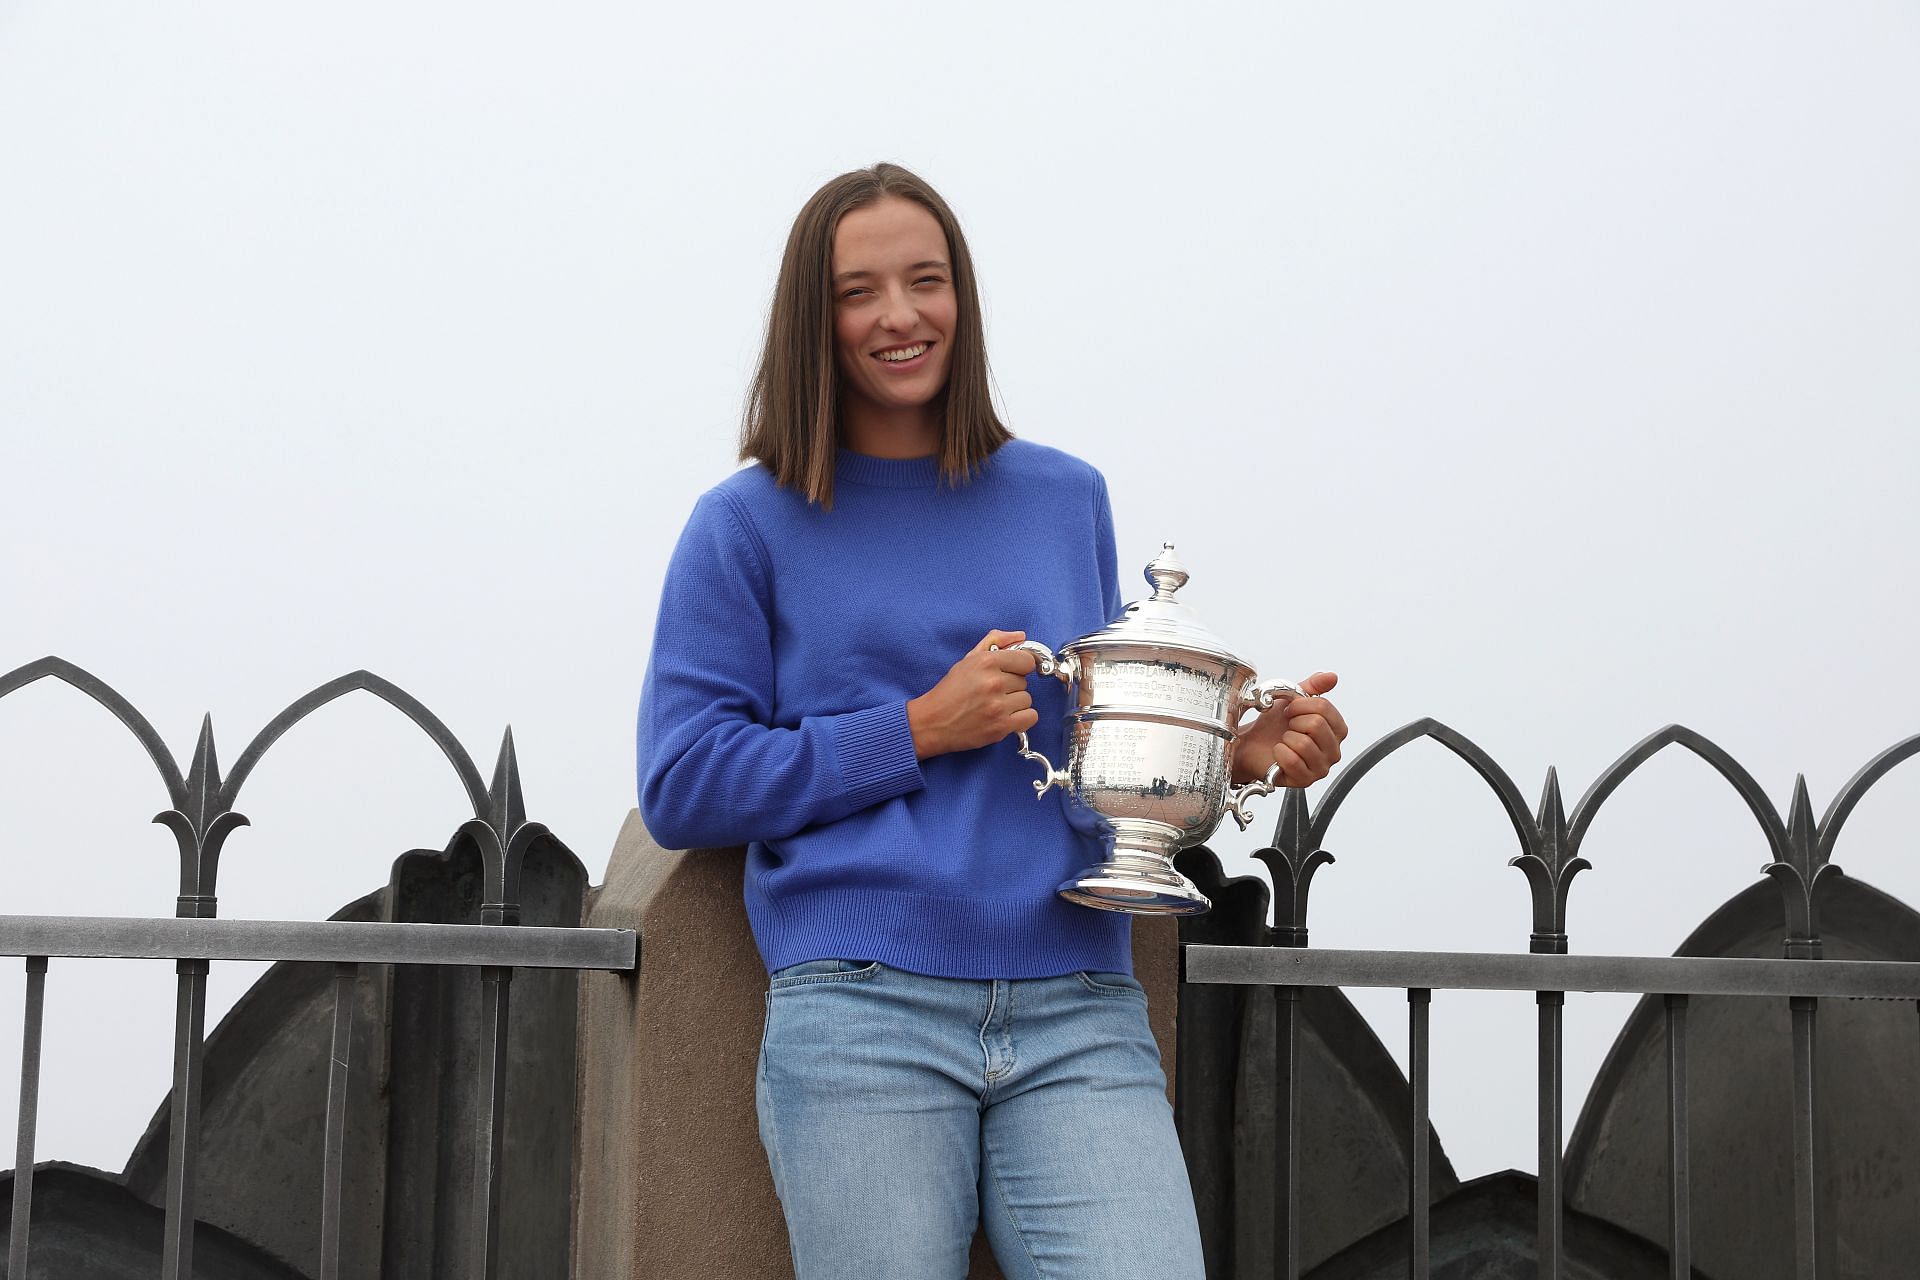 Iga Swiatek of Poland poses with the US Open trophy at Top of the Rock at the 2022 US Open Champions Portraits